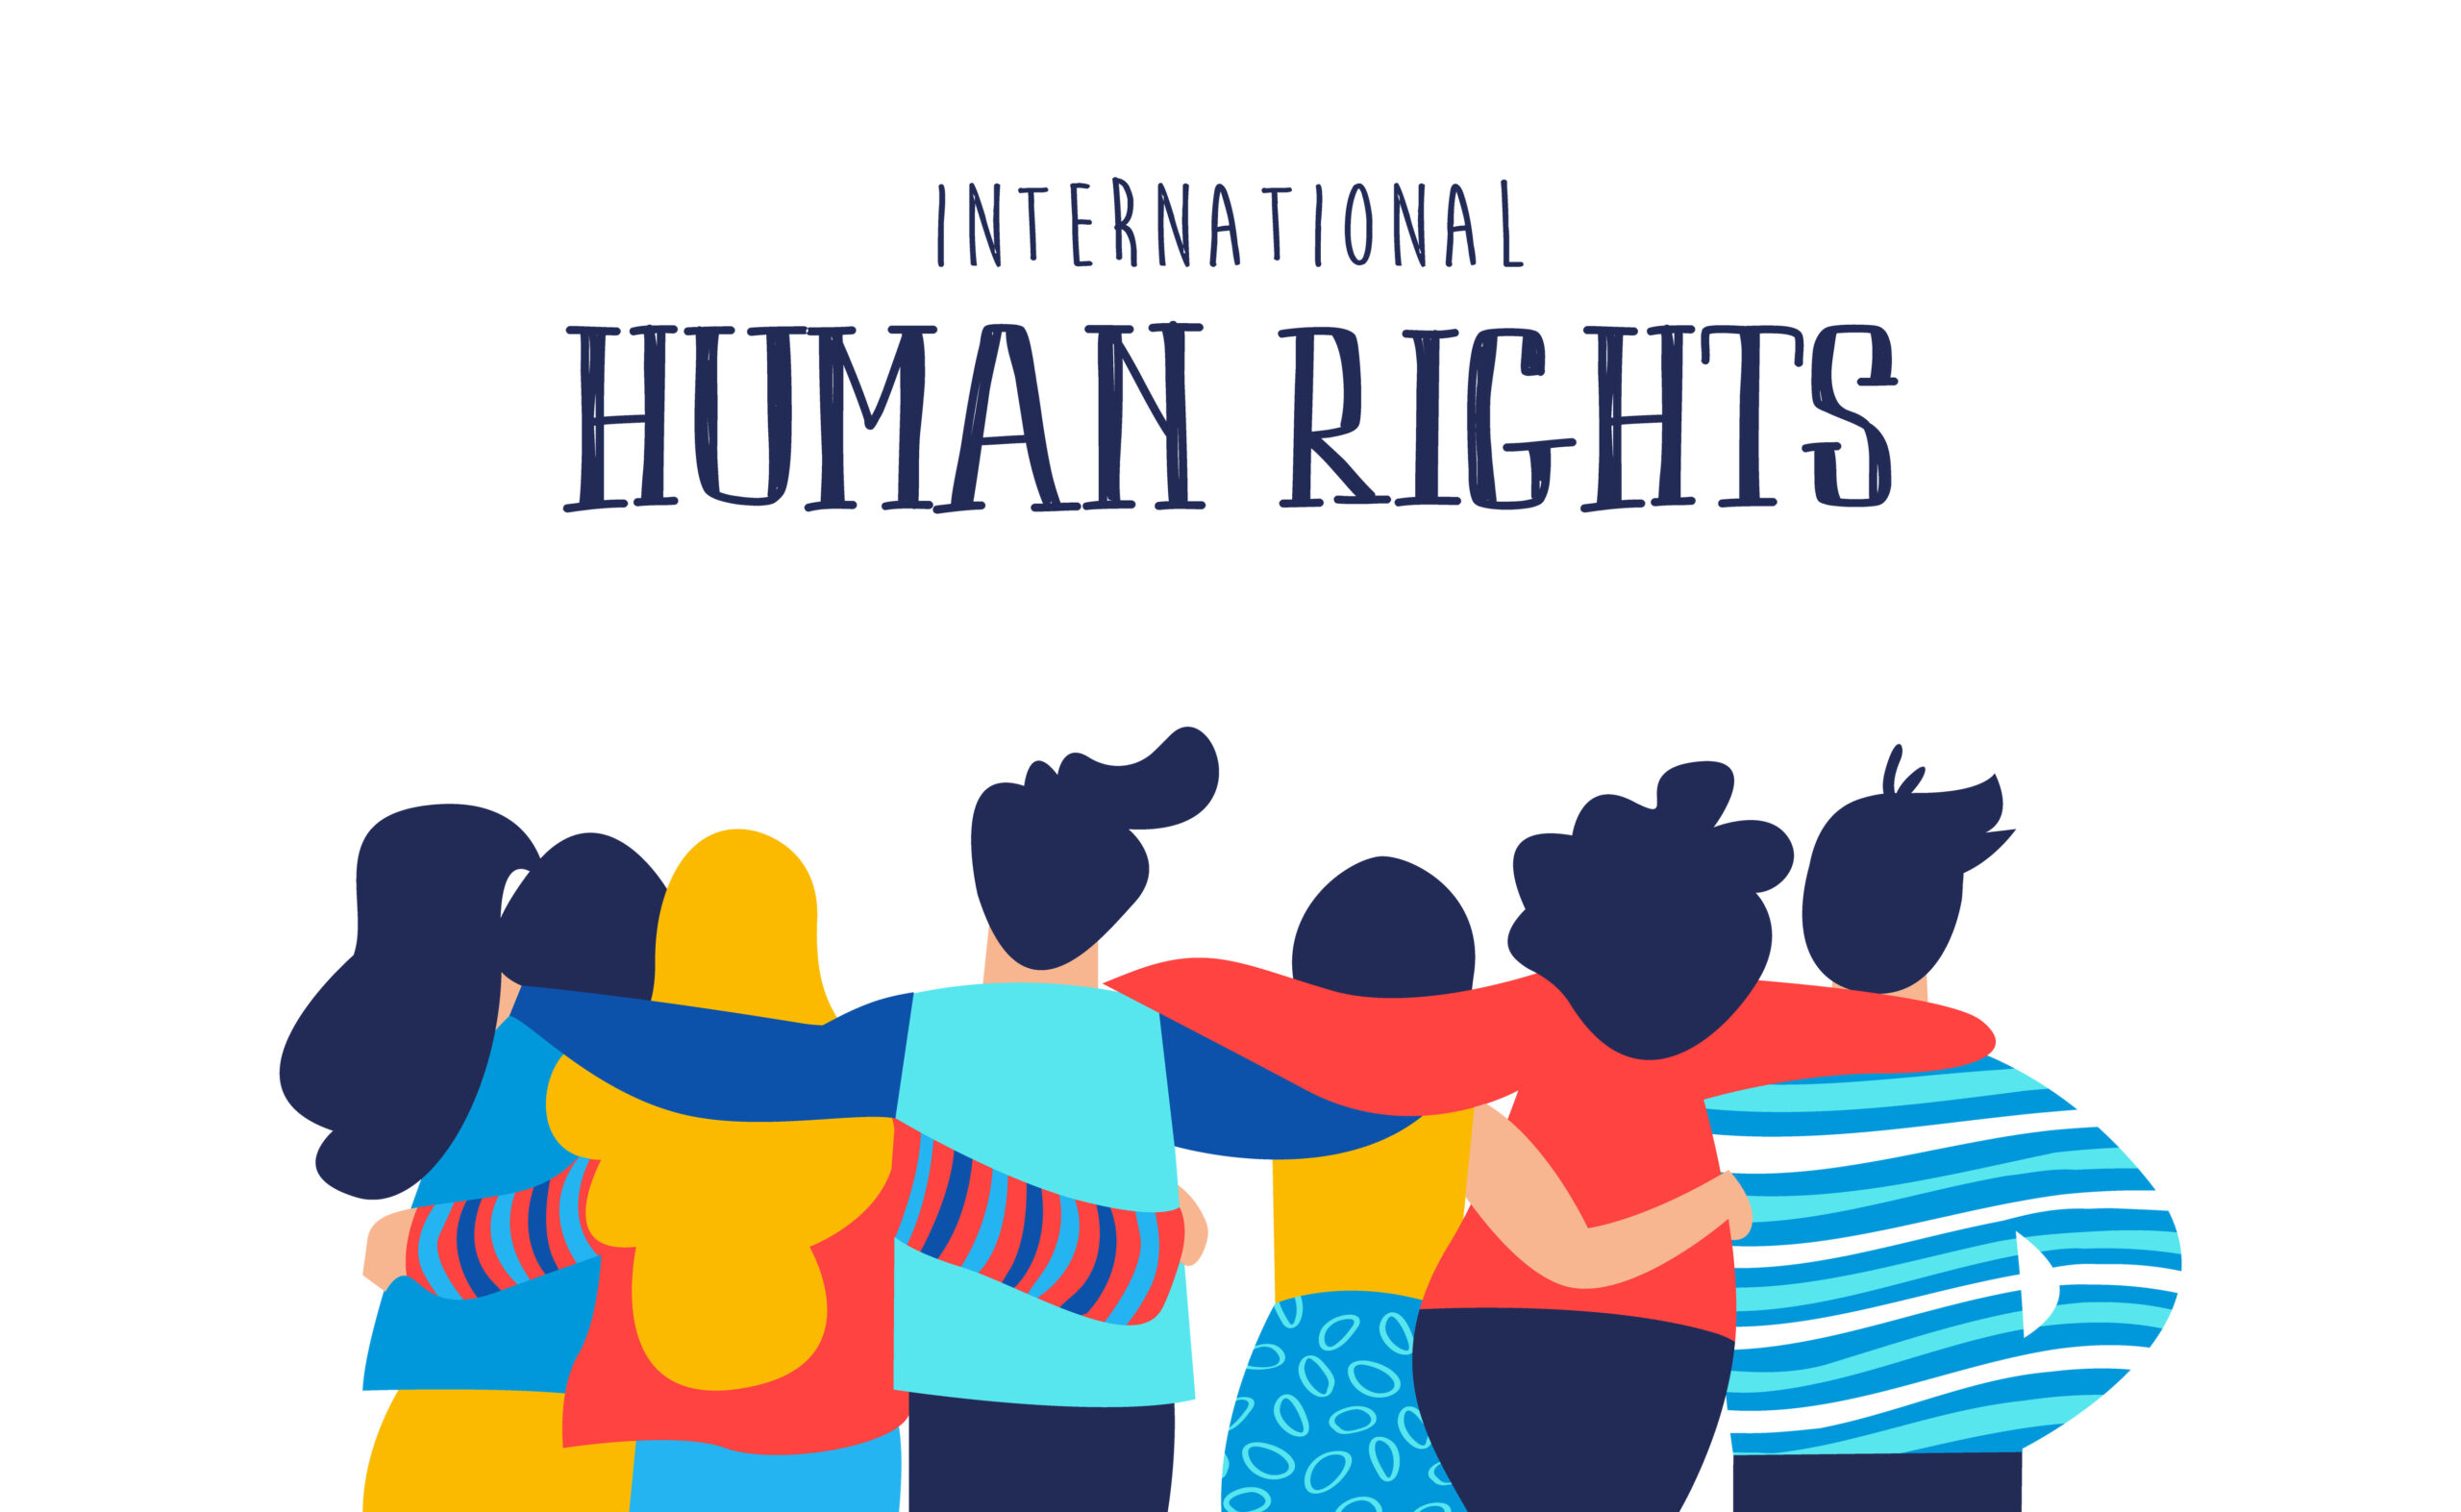 "International Human Rights" in text over cartoon graphic of diverse peoples locking arms (back view)